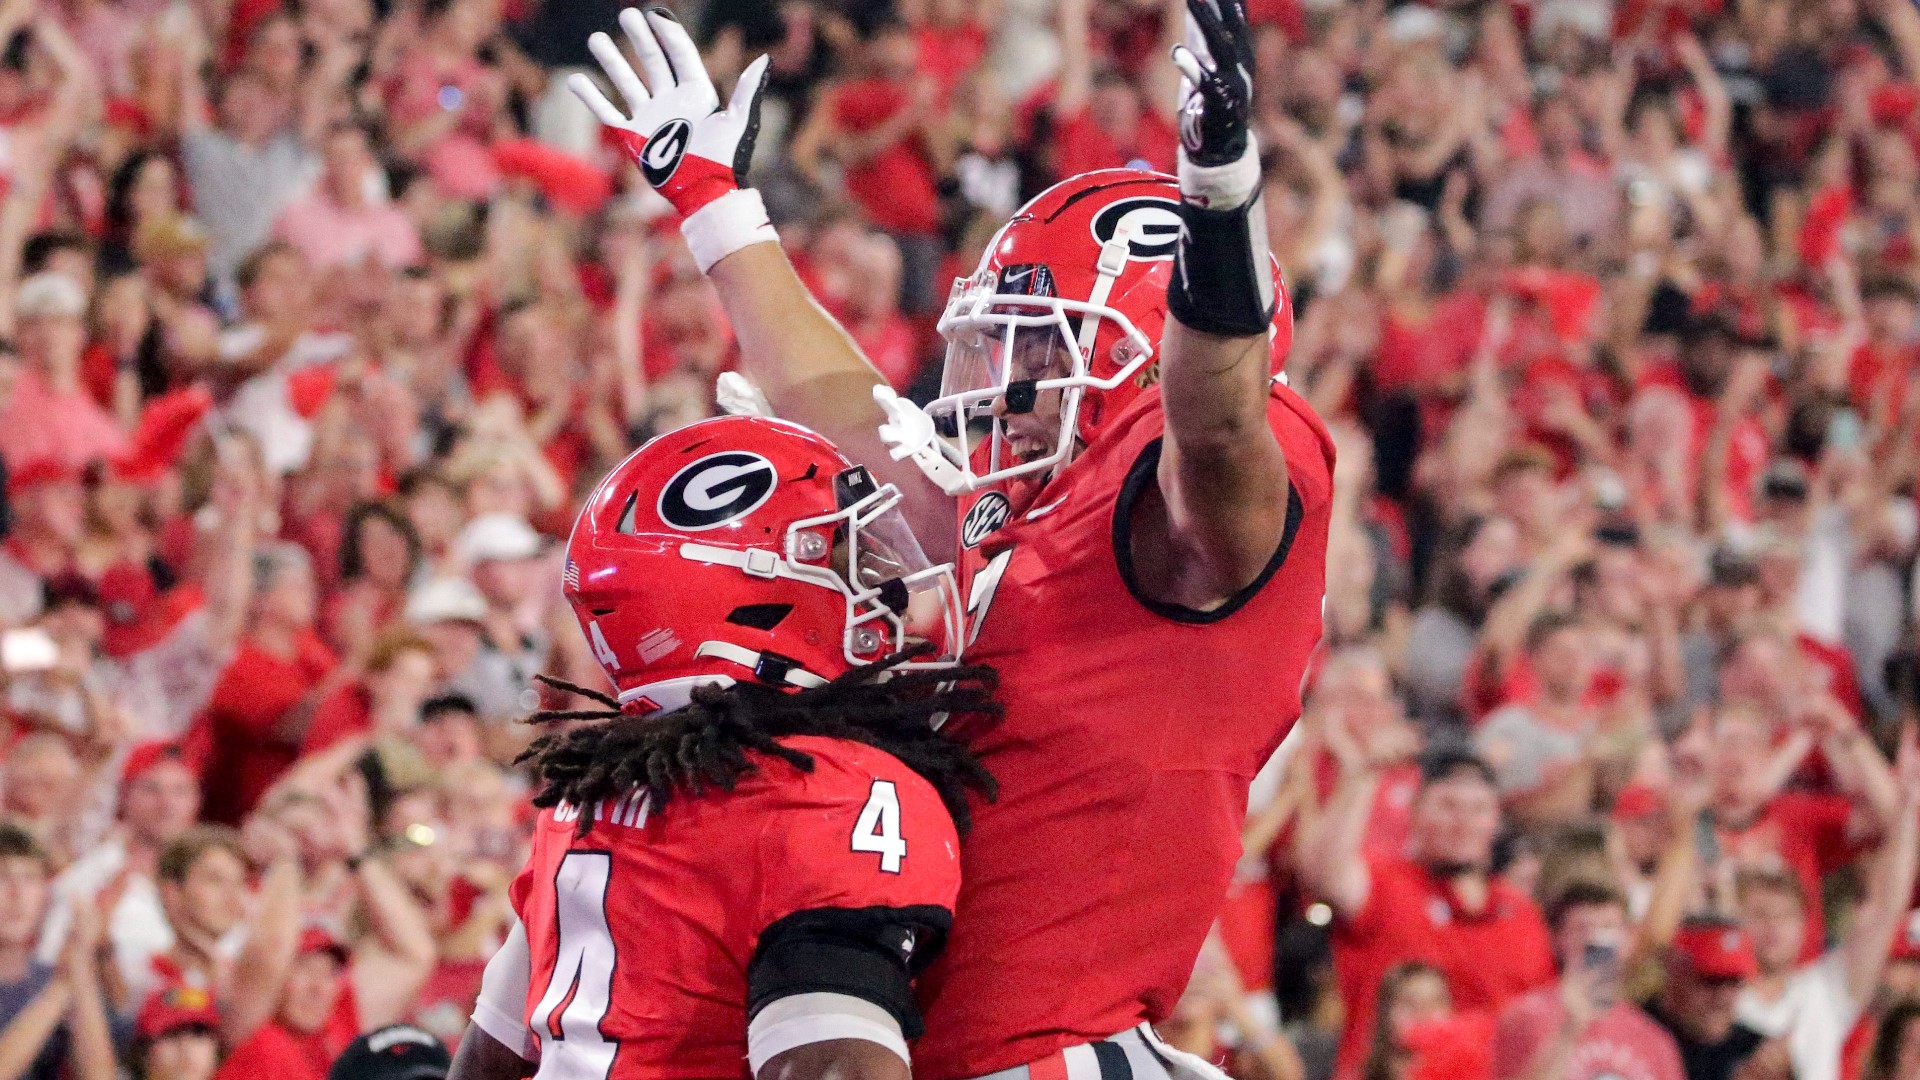 This is UGA's first appearance in the Orange Bowl since 1960.